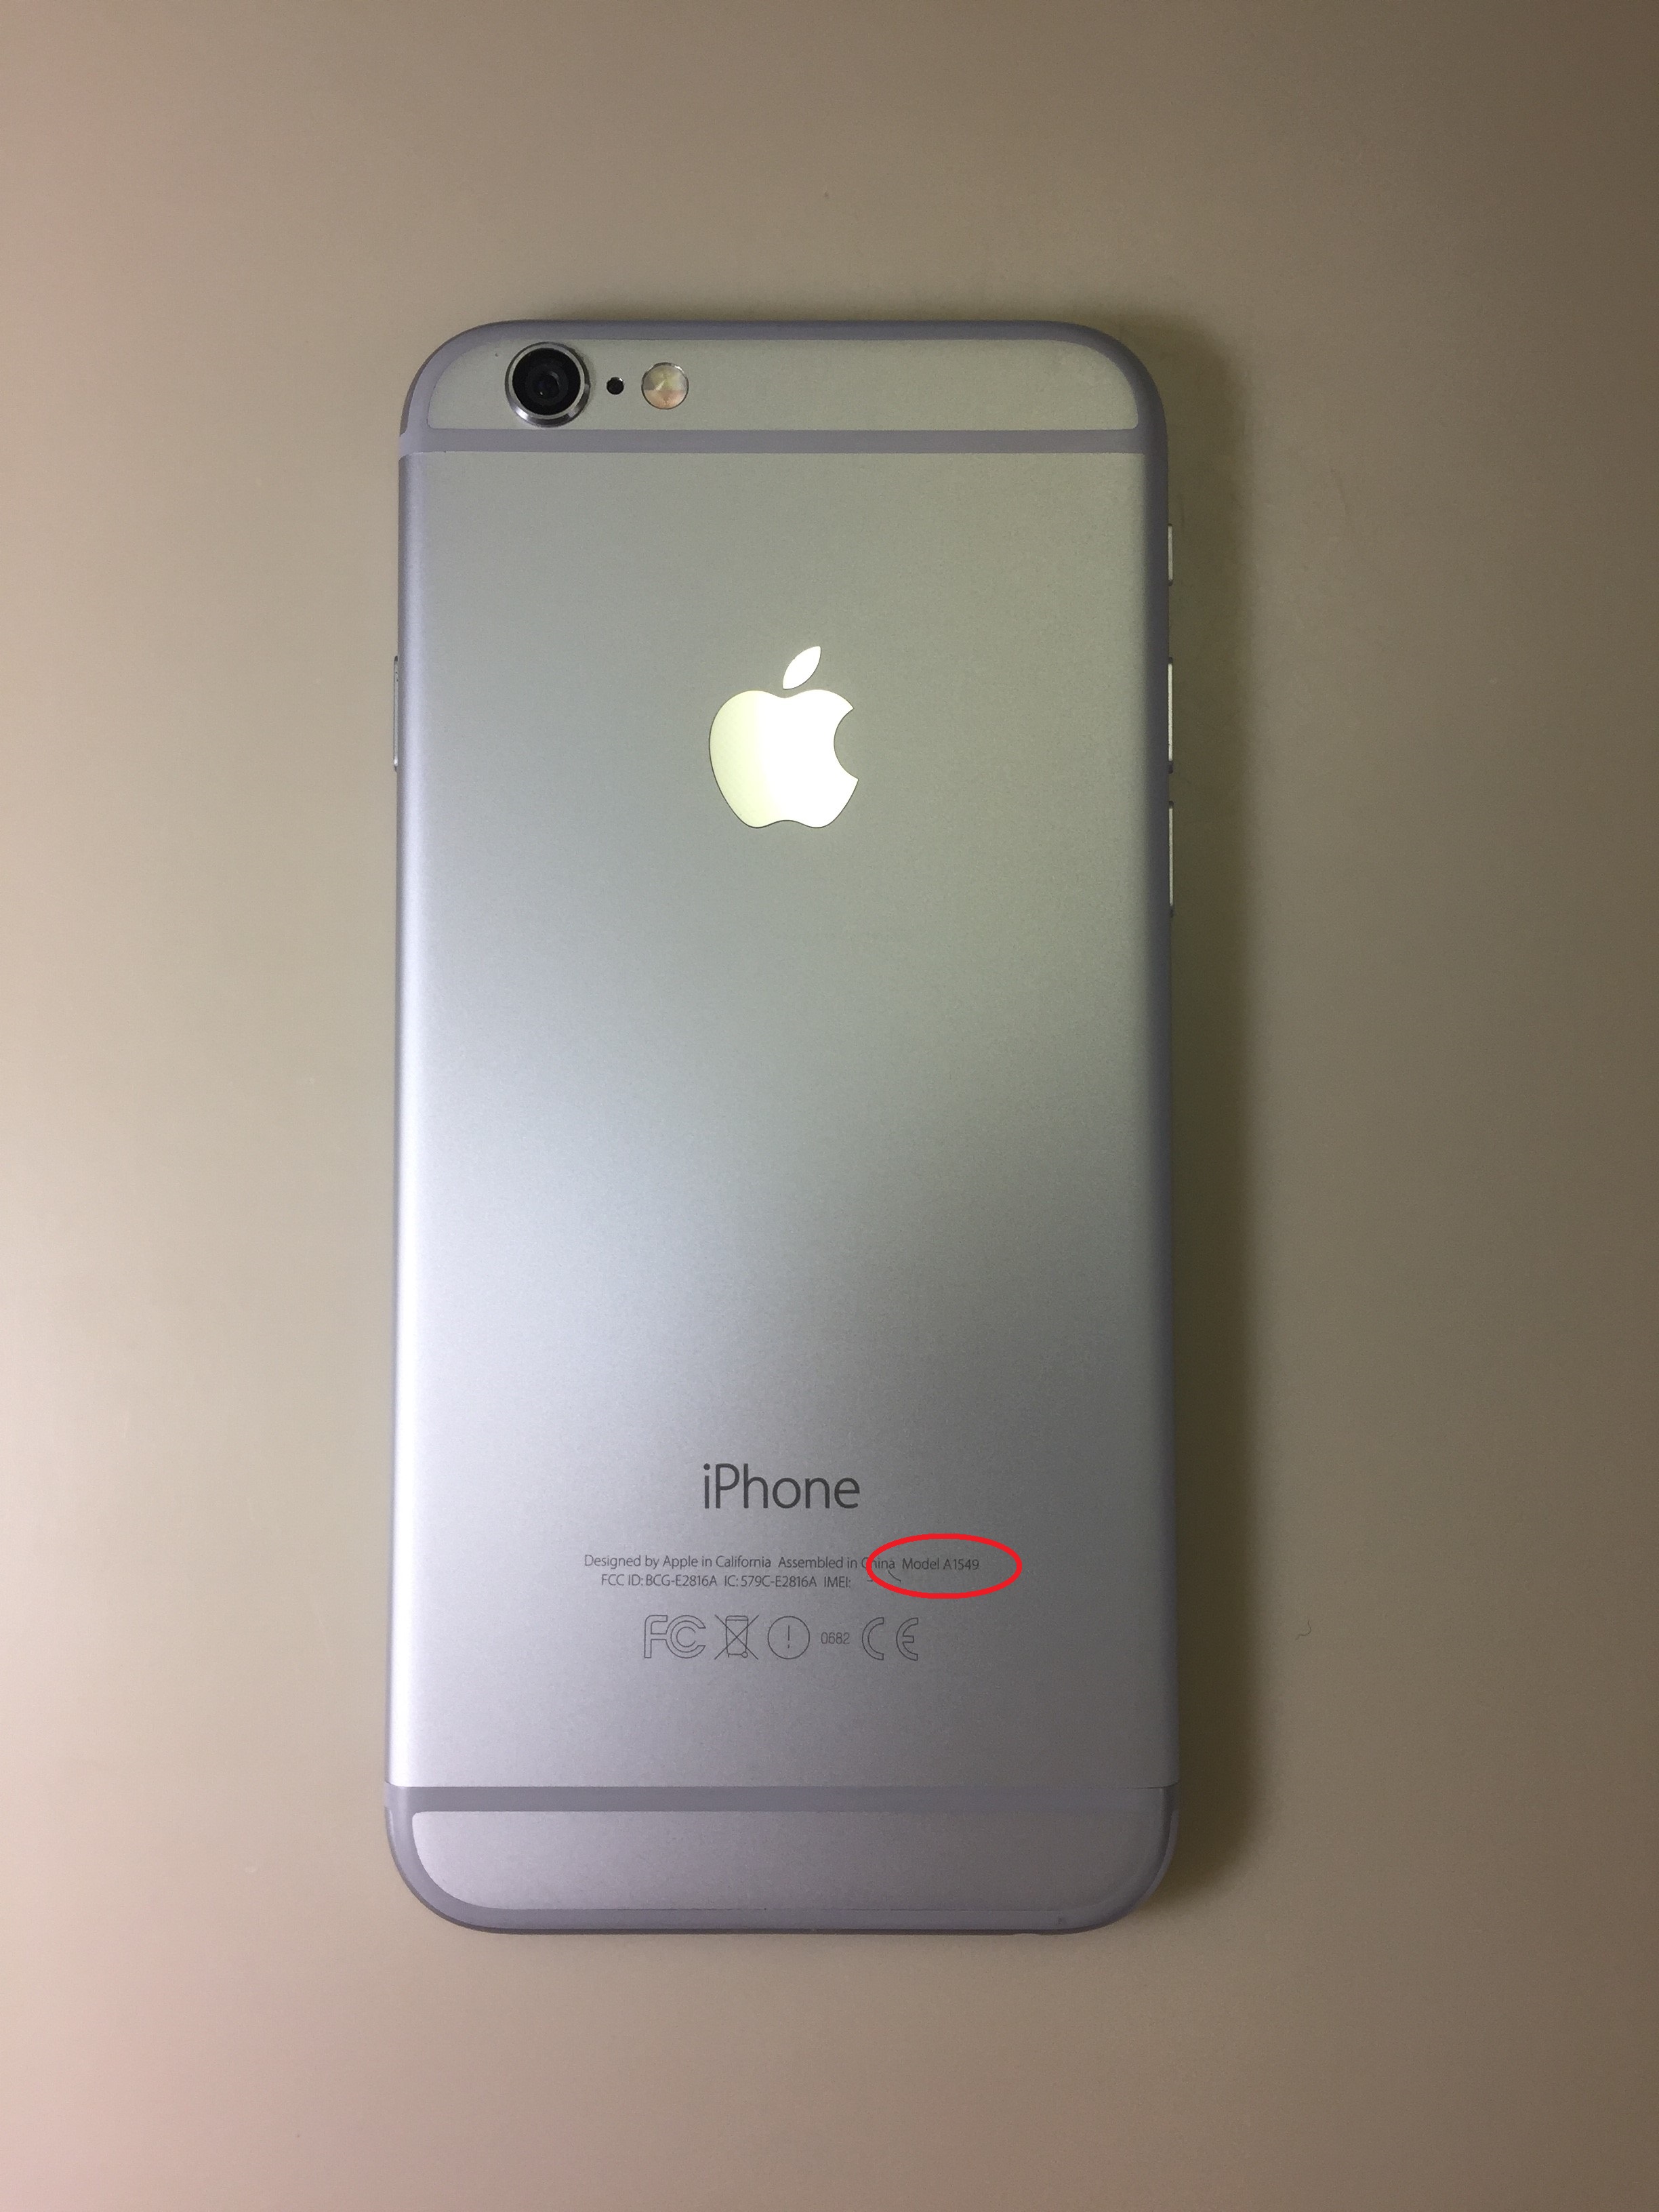 Apple iPhone 6 Screen Replacement - Cell Phone, Tablet, Computer and ...